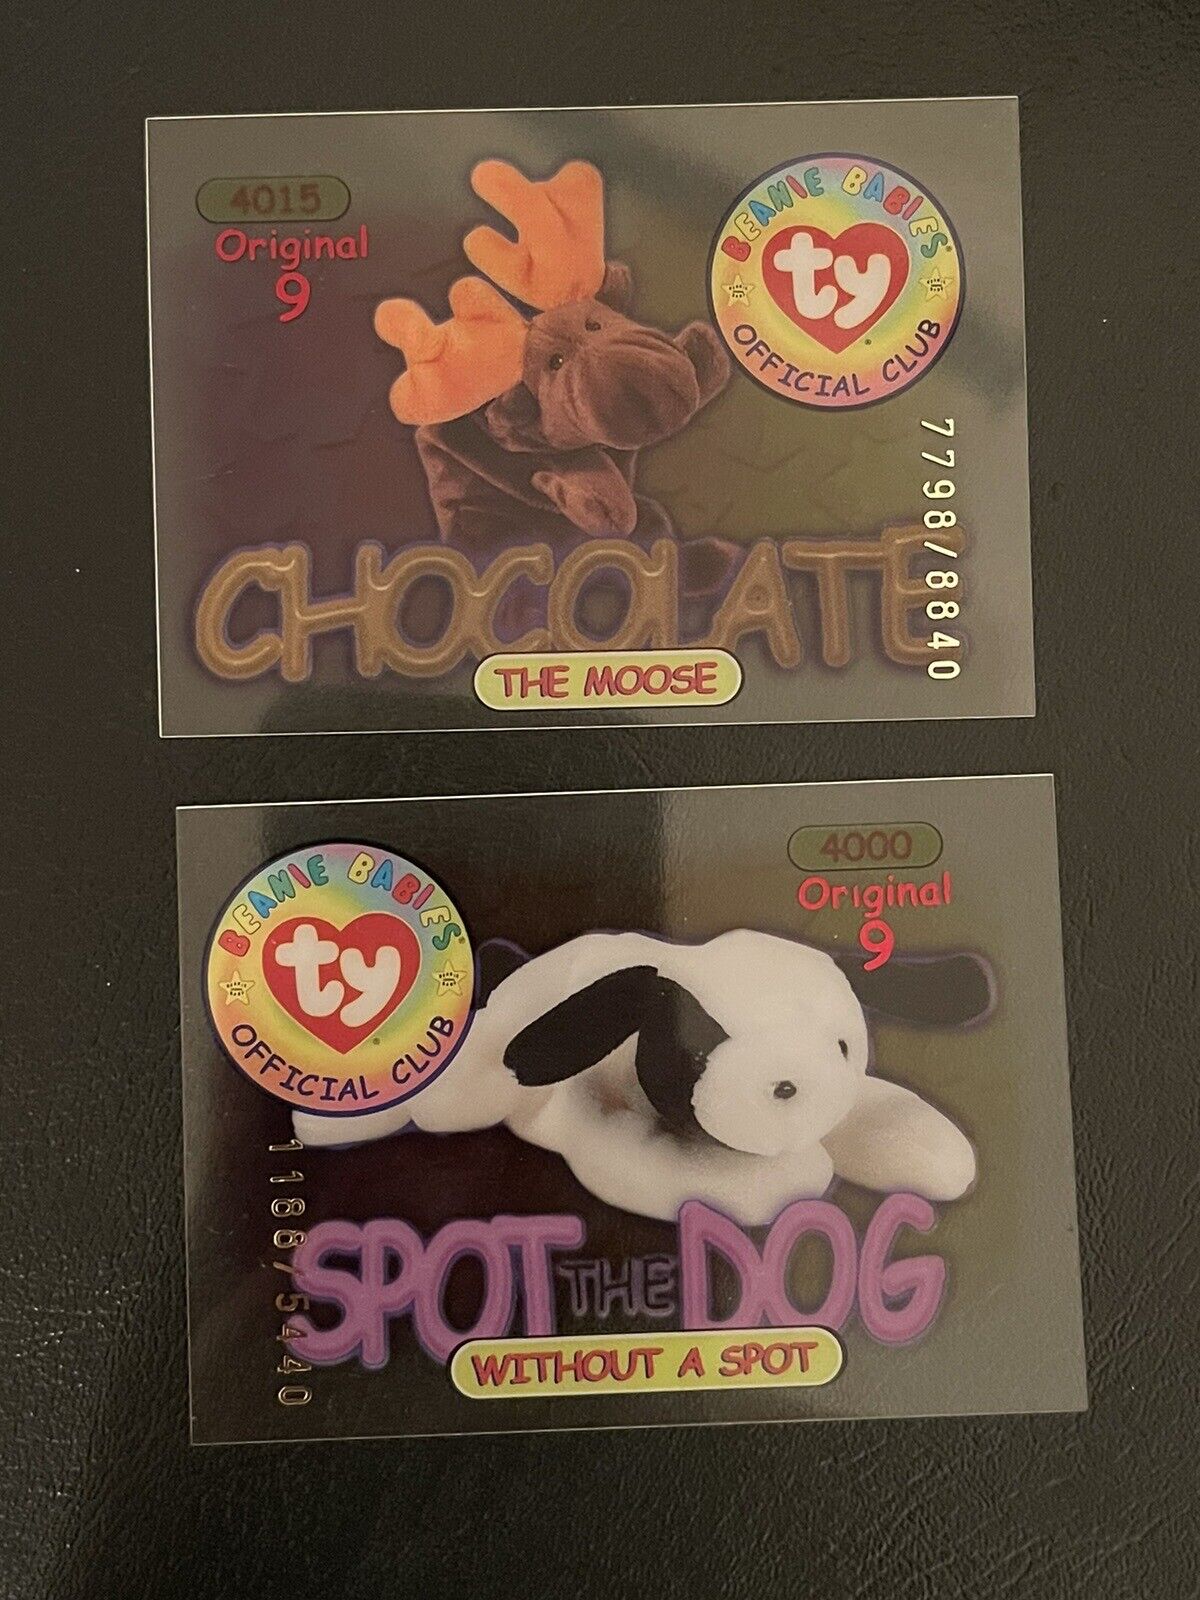 TY Beanie Baby Trading Card Original 9 Lot Of 2 Red~Chocolate&Spot The Dog